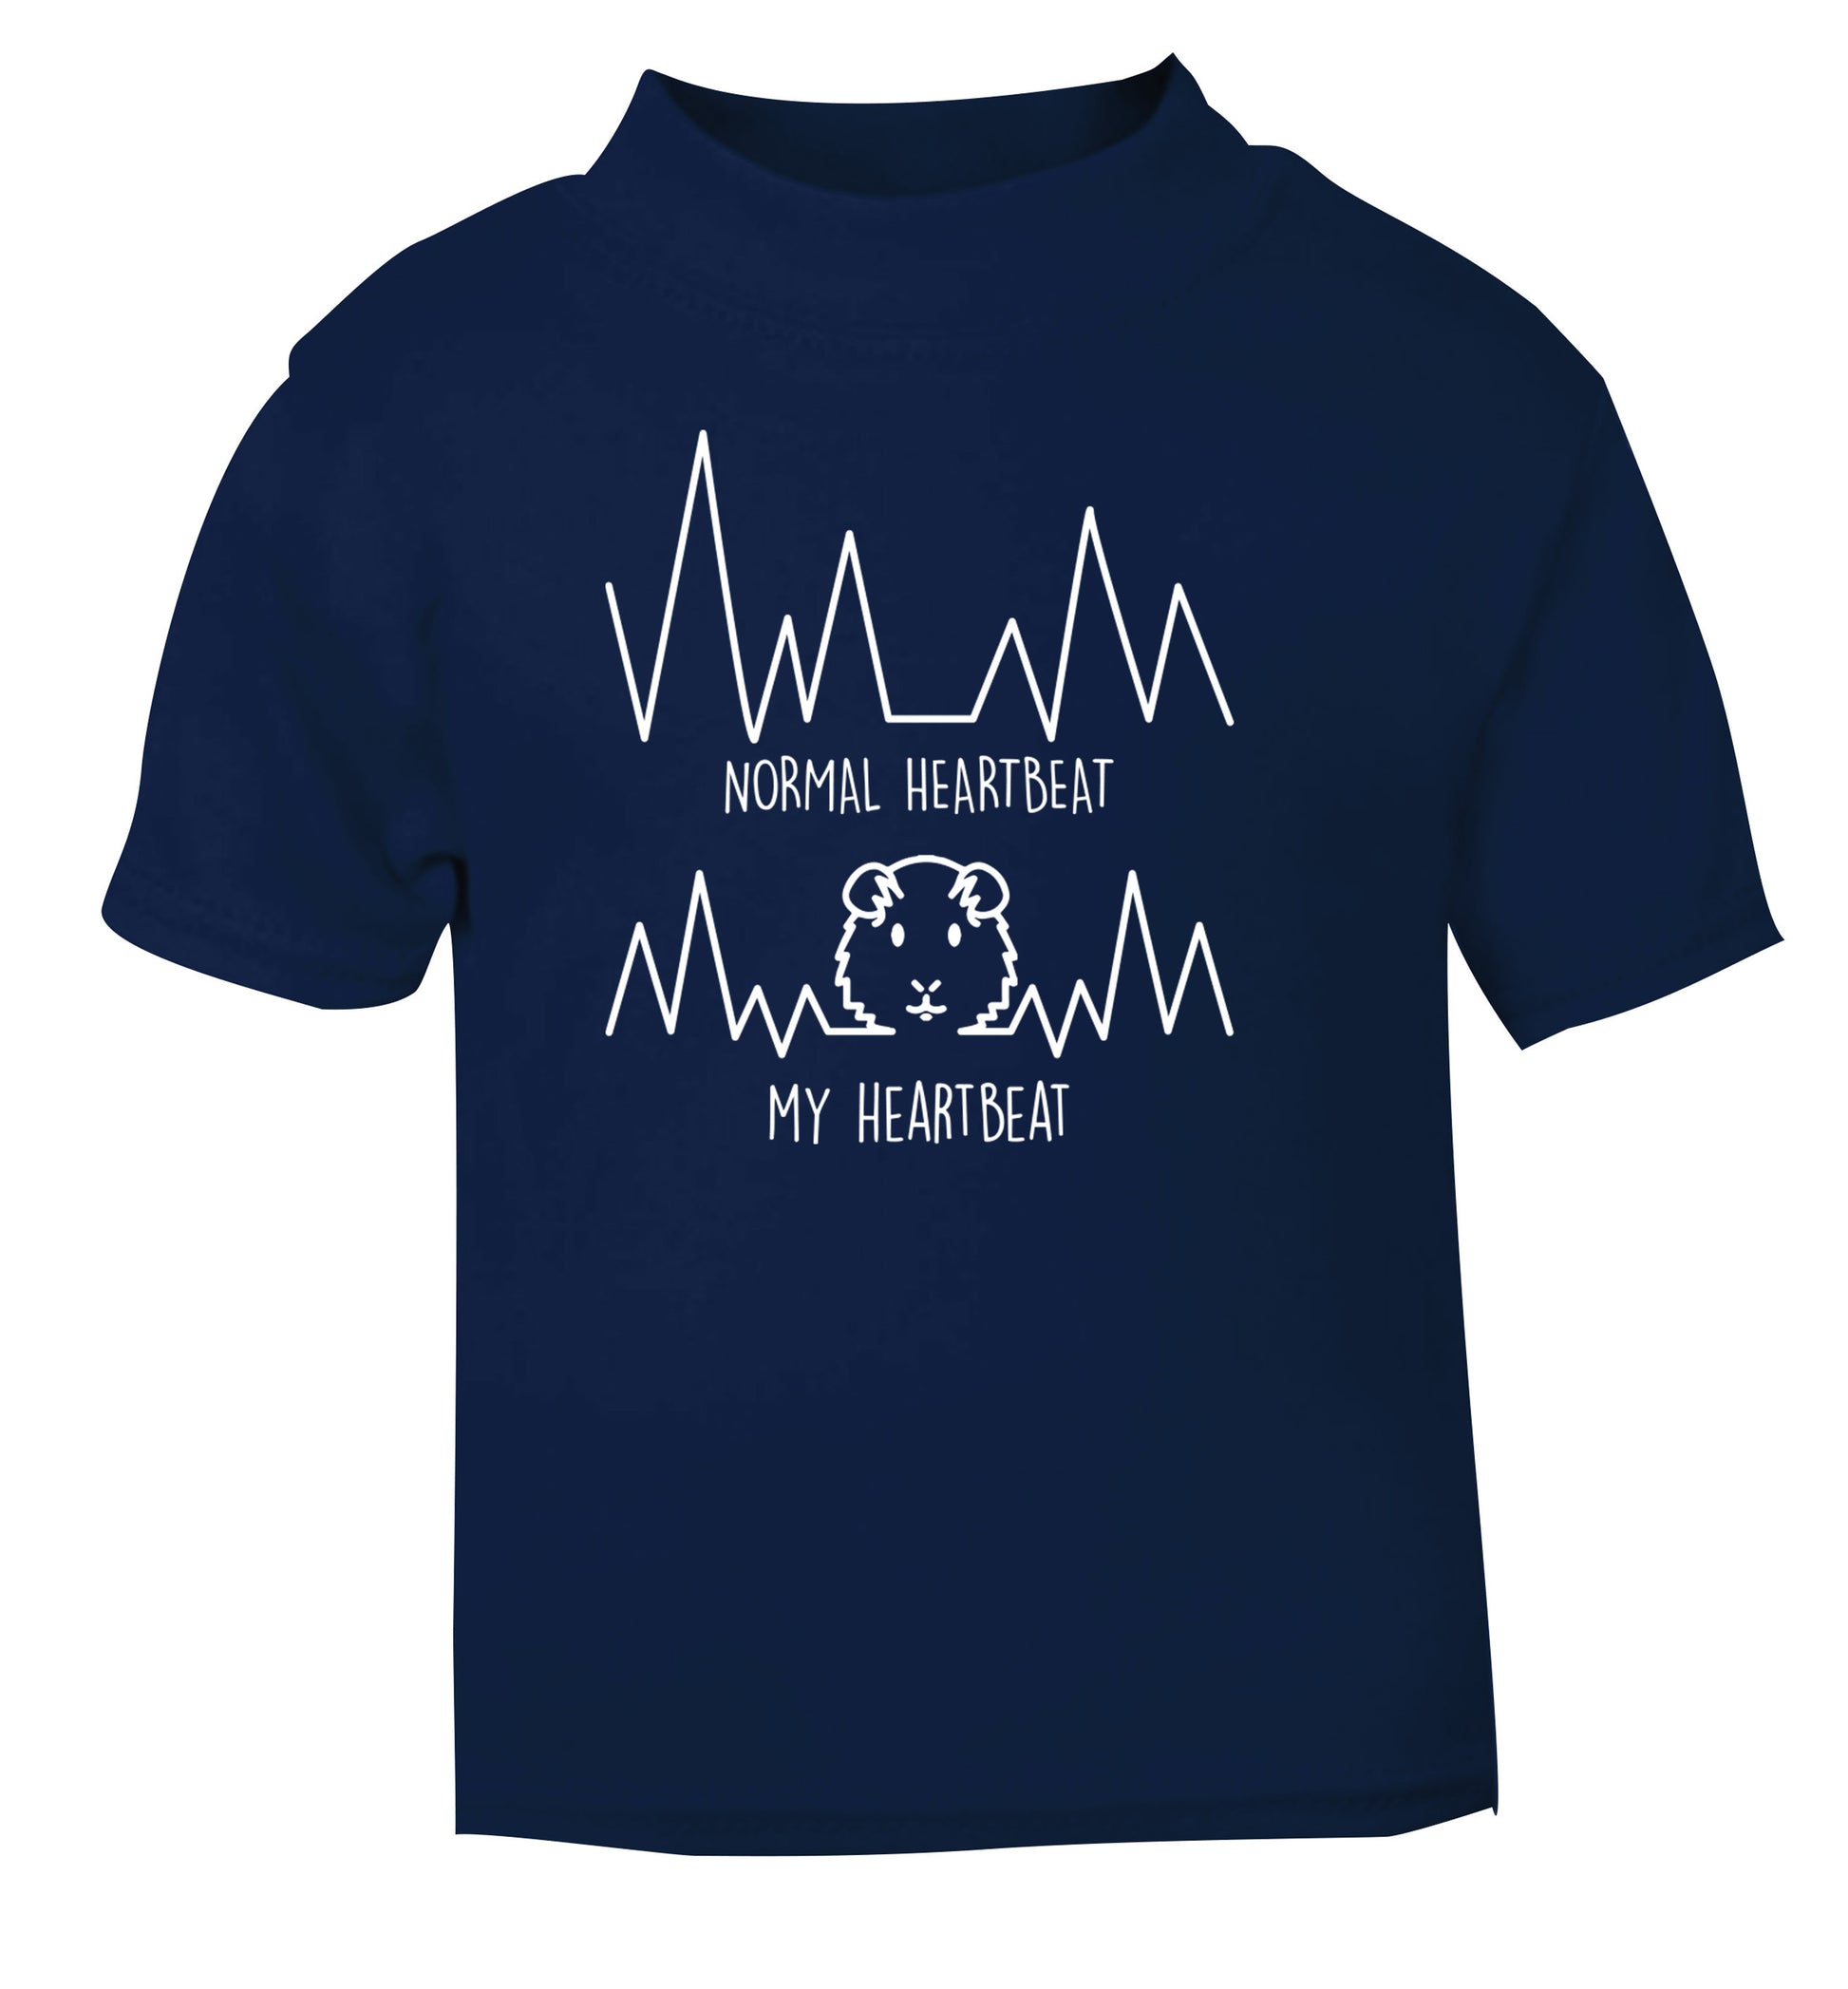 Normal heartbeat vs my heartbeat guinea pig lover navy Baby Toddler Tshirt 2 Years